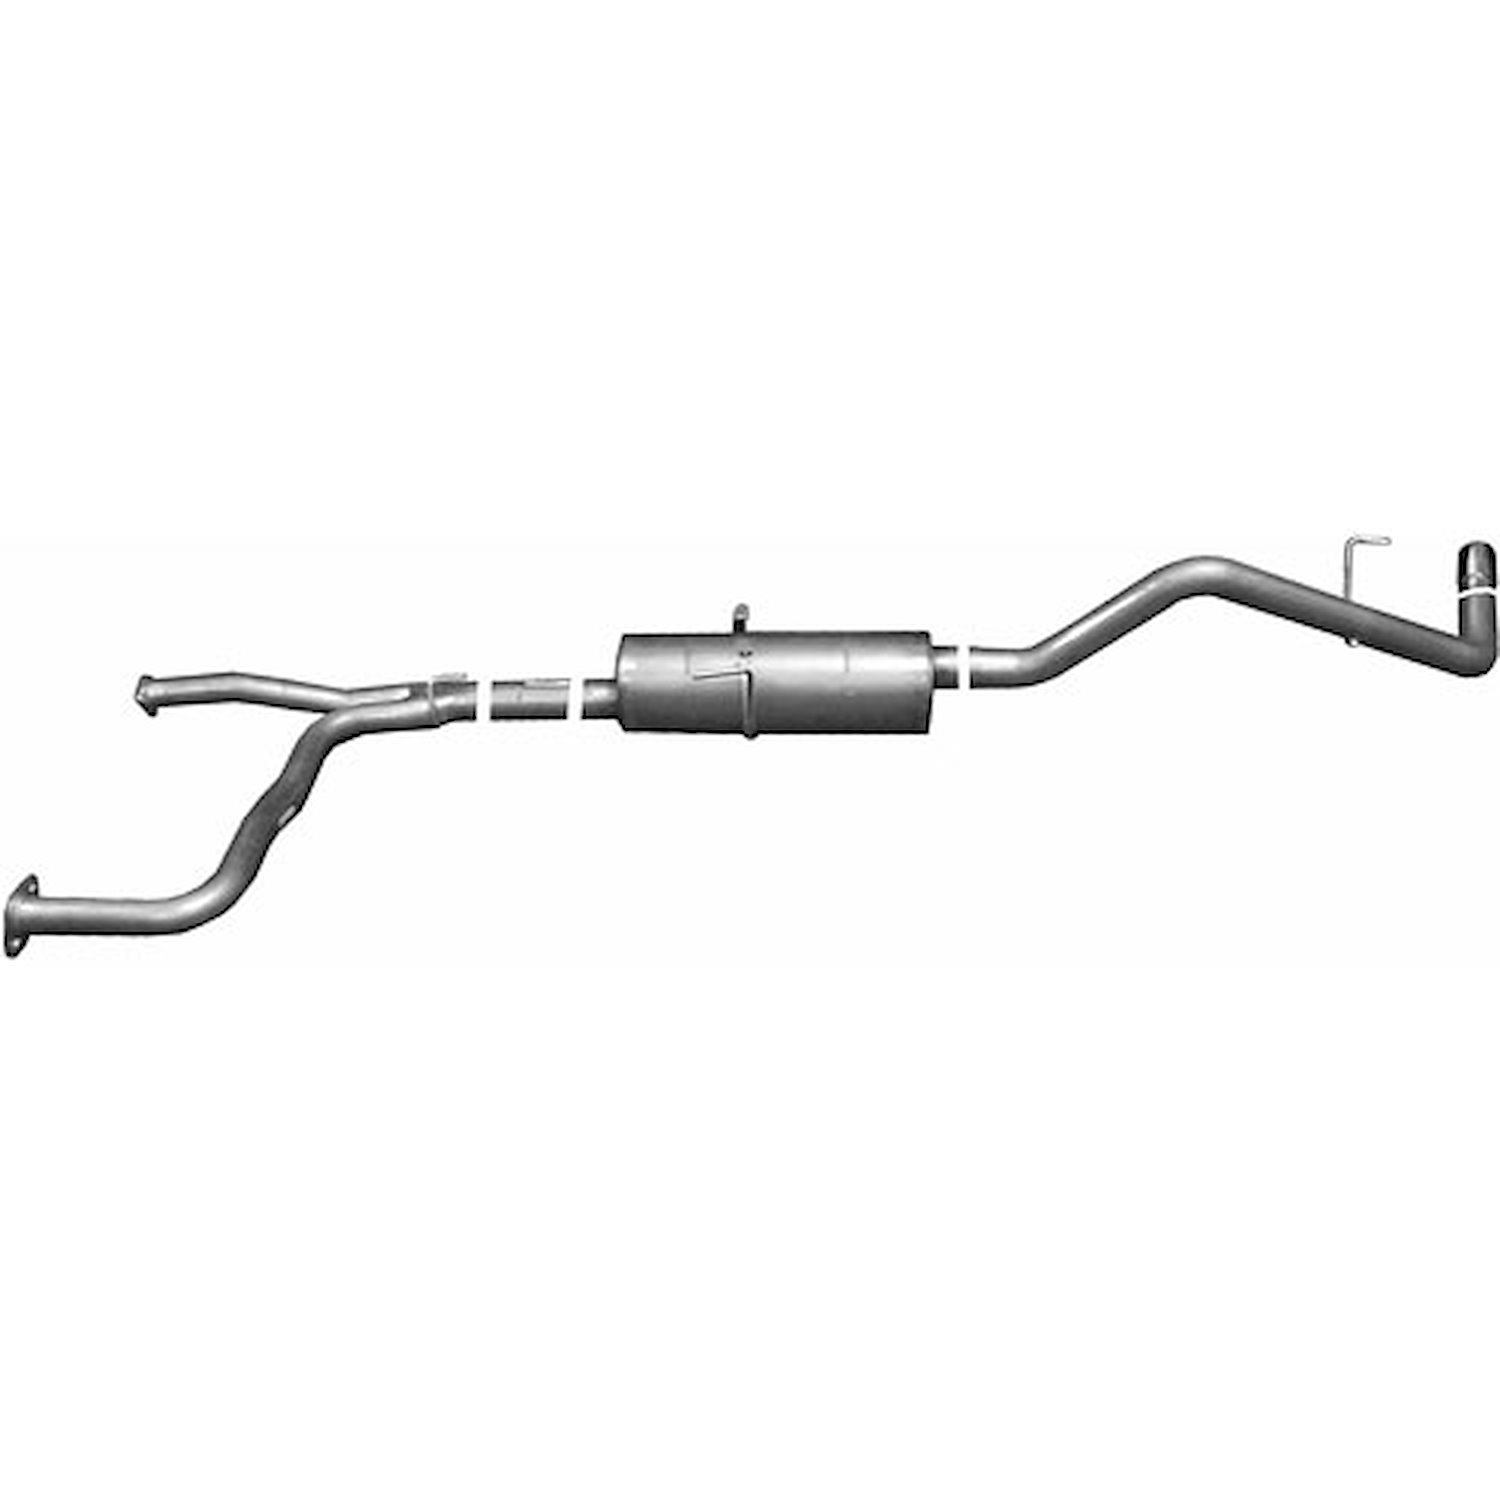 Swept-Side Cat-Back Exhaust 2005-16 for Nissan Frontier 4.0L